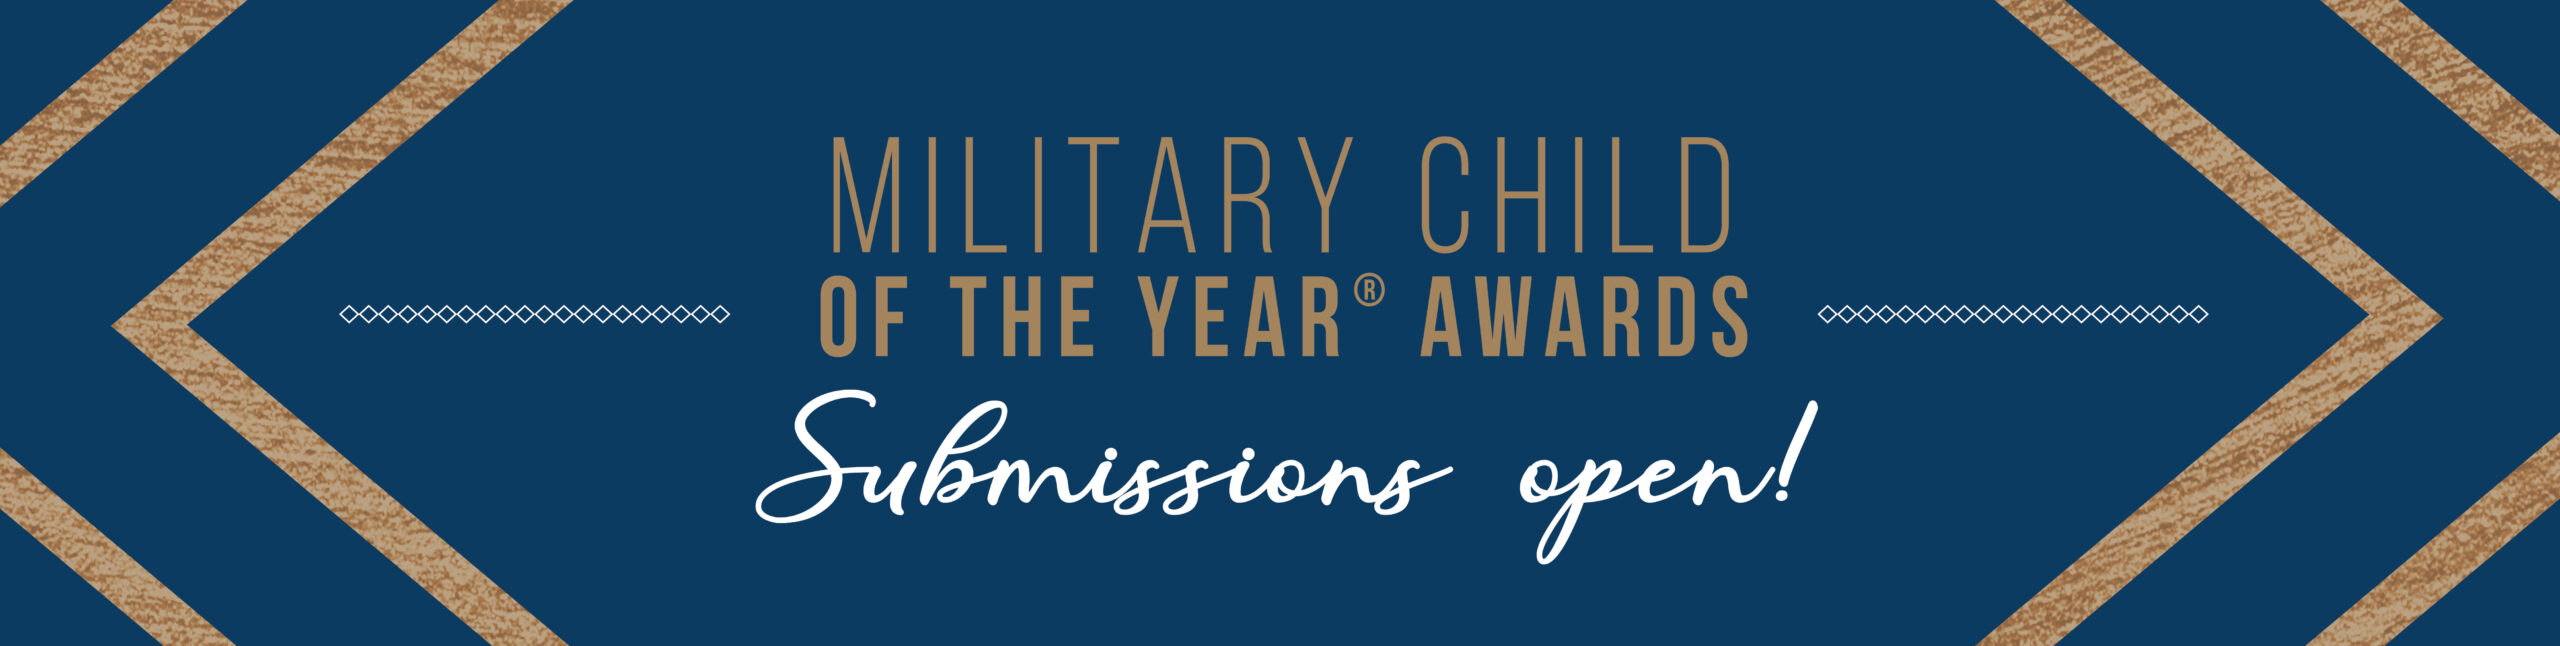 military child of the year submissions open